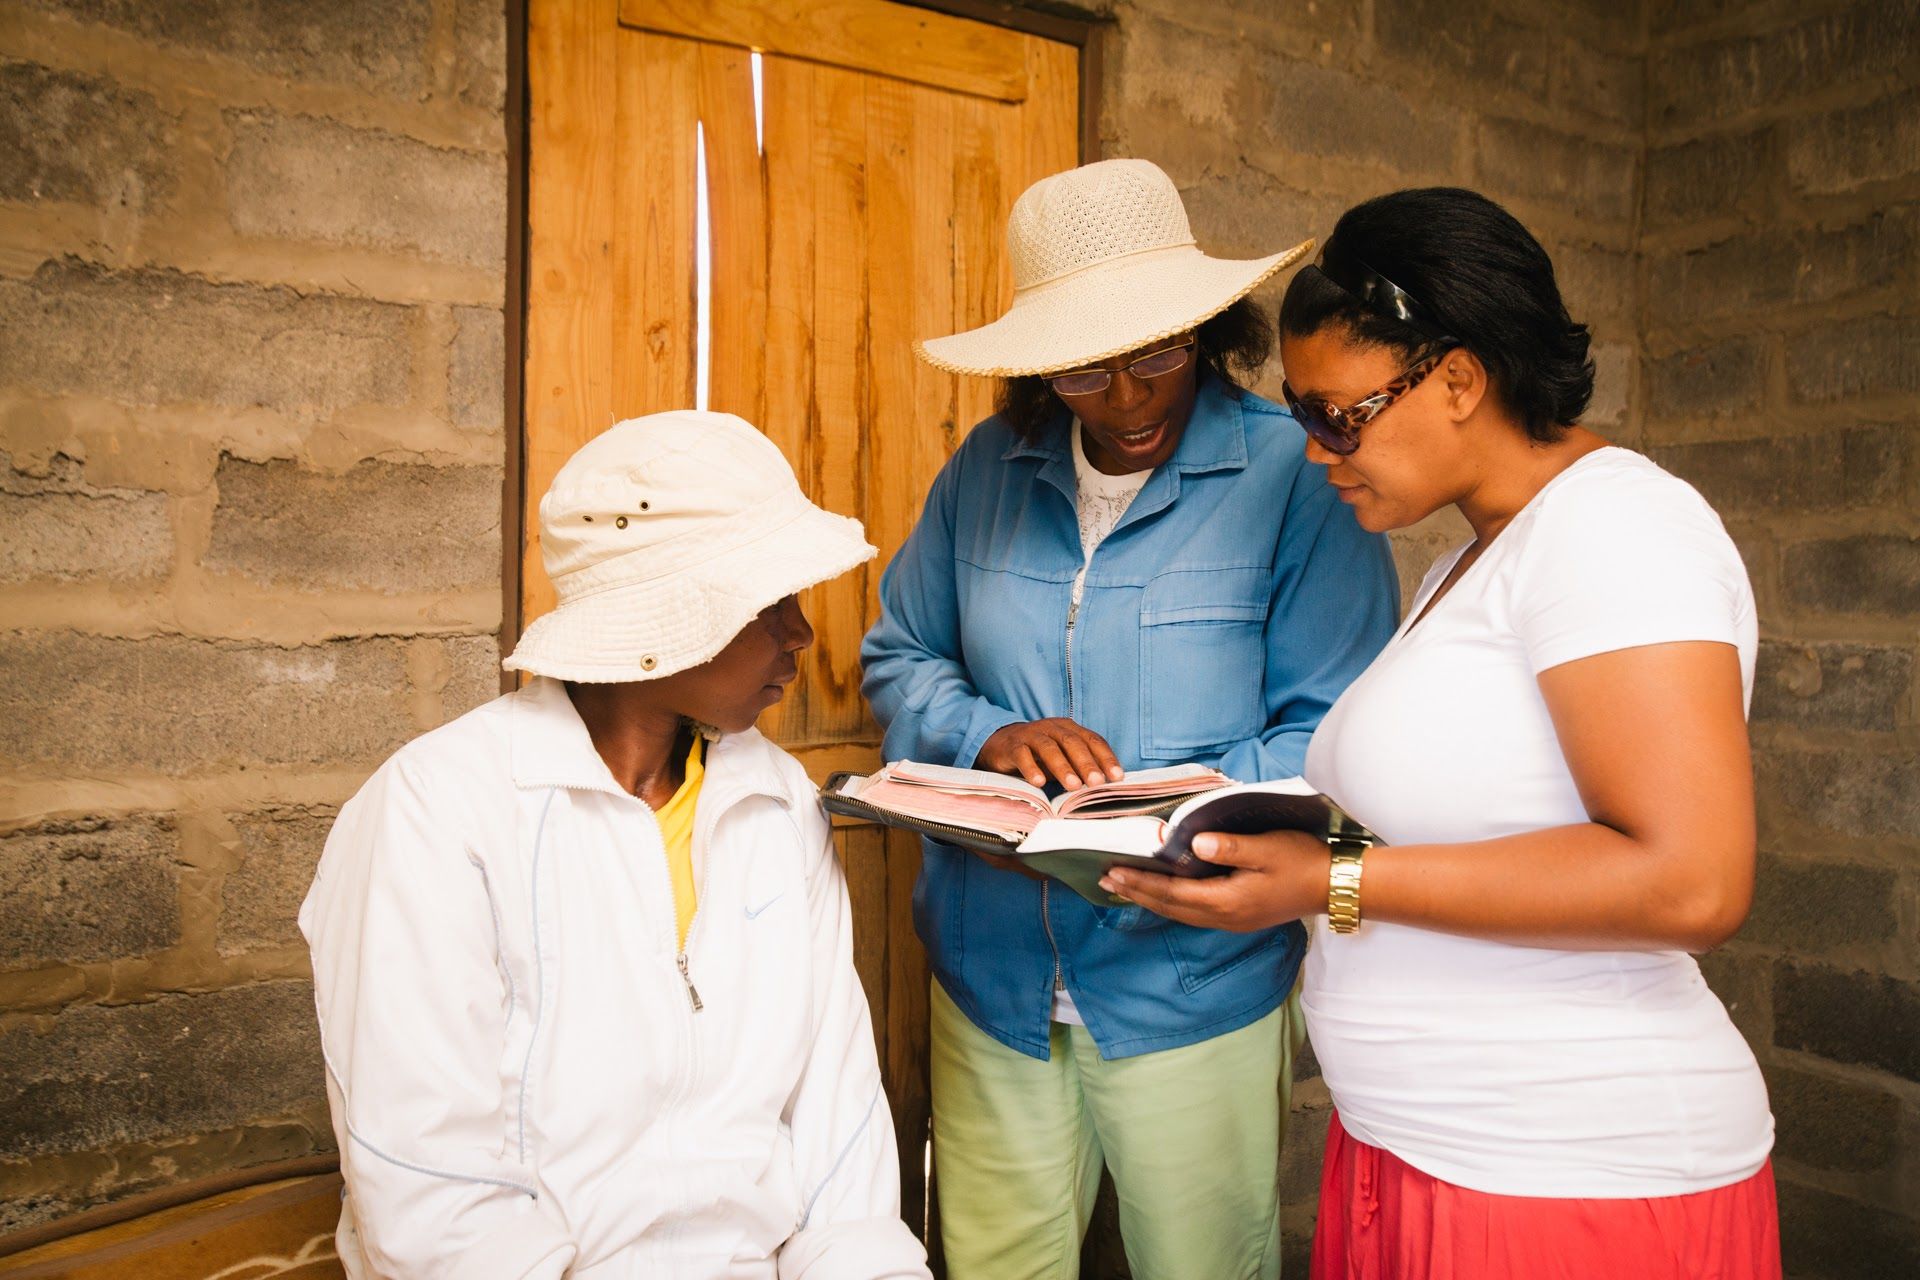 People sharing the good news in Lesotho. Lesotho is a small mountainous country completely surrounded by South Africa. Photo by Doseong Park.